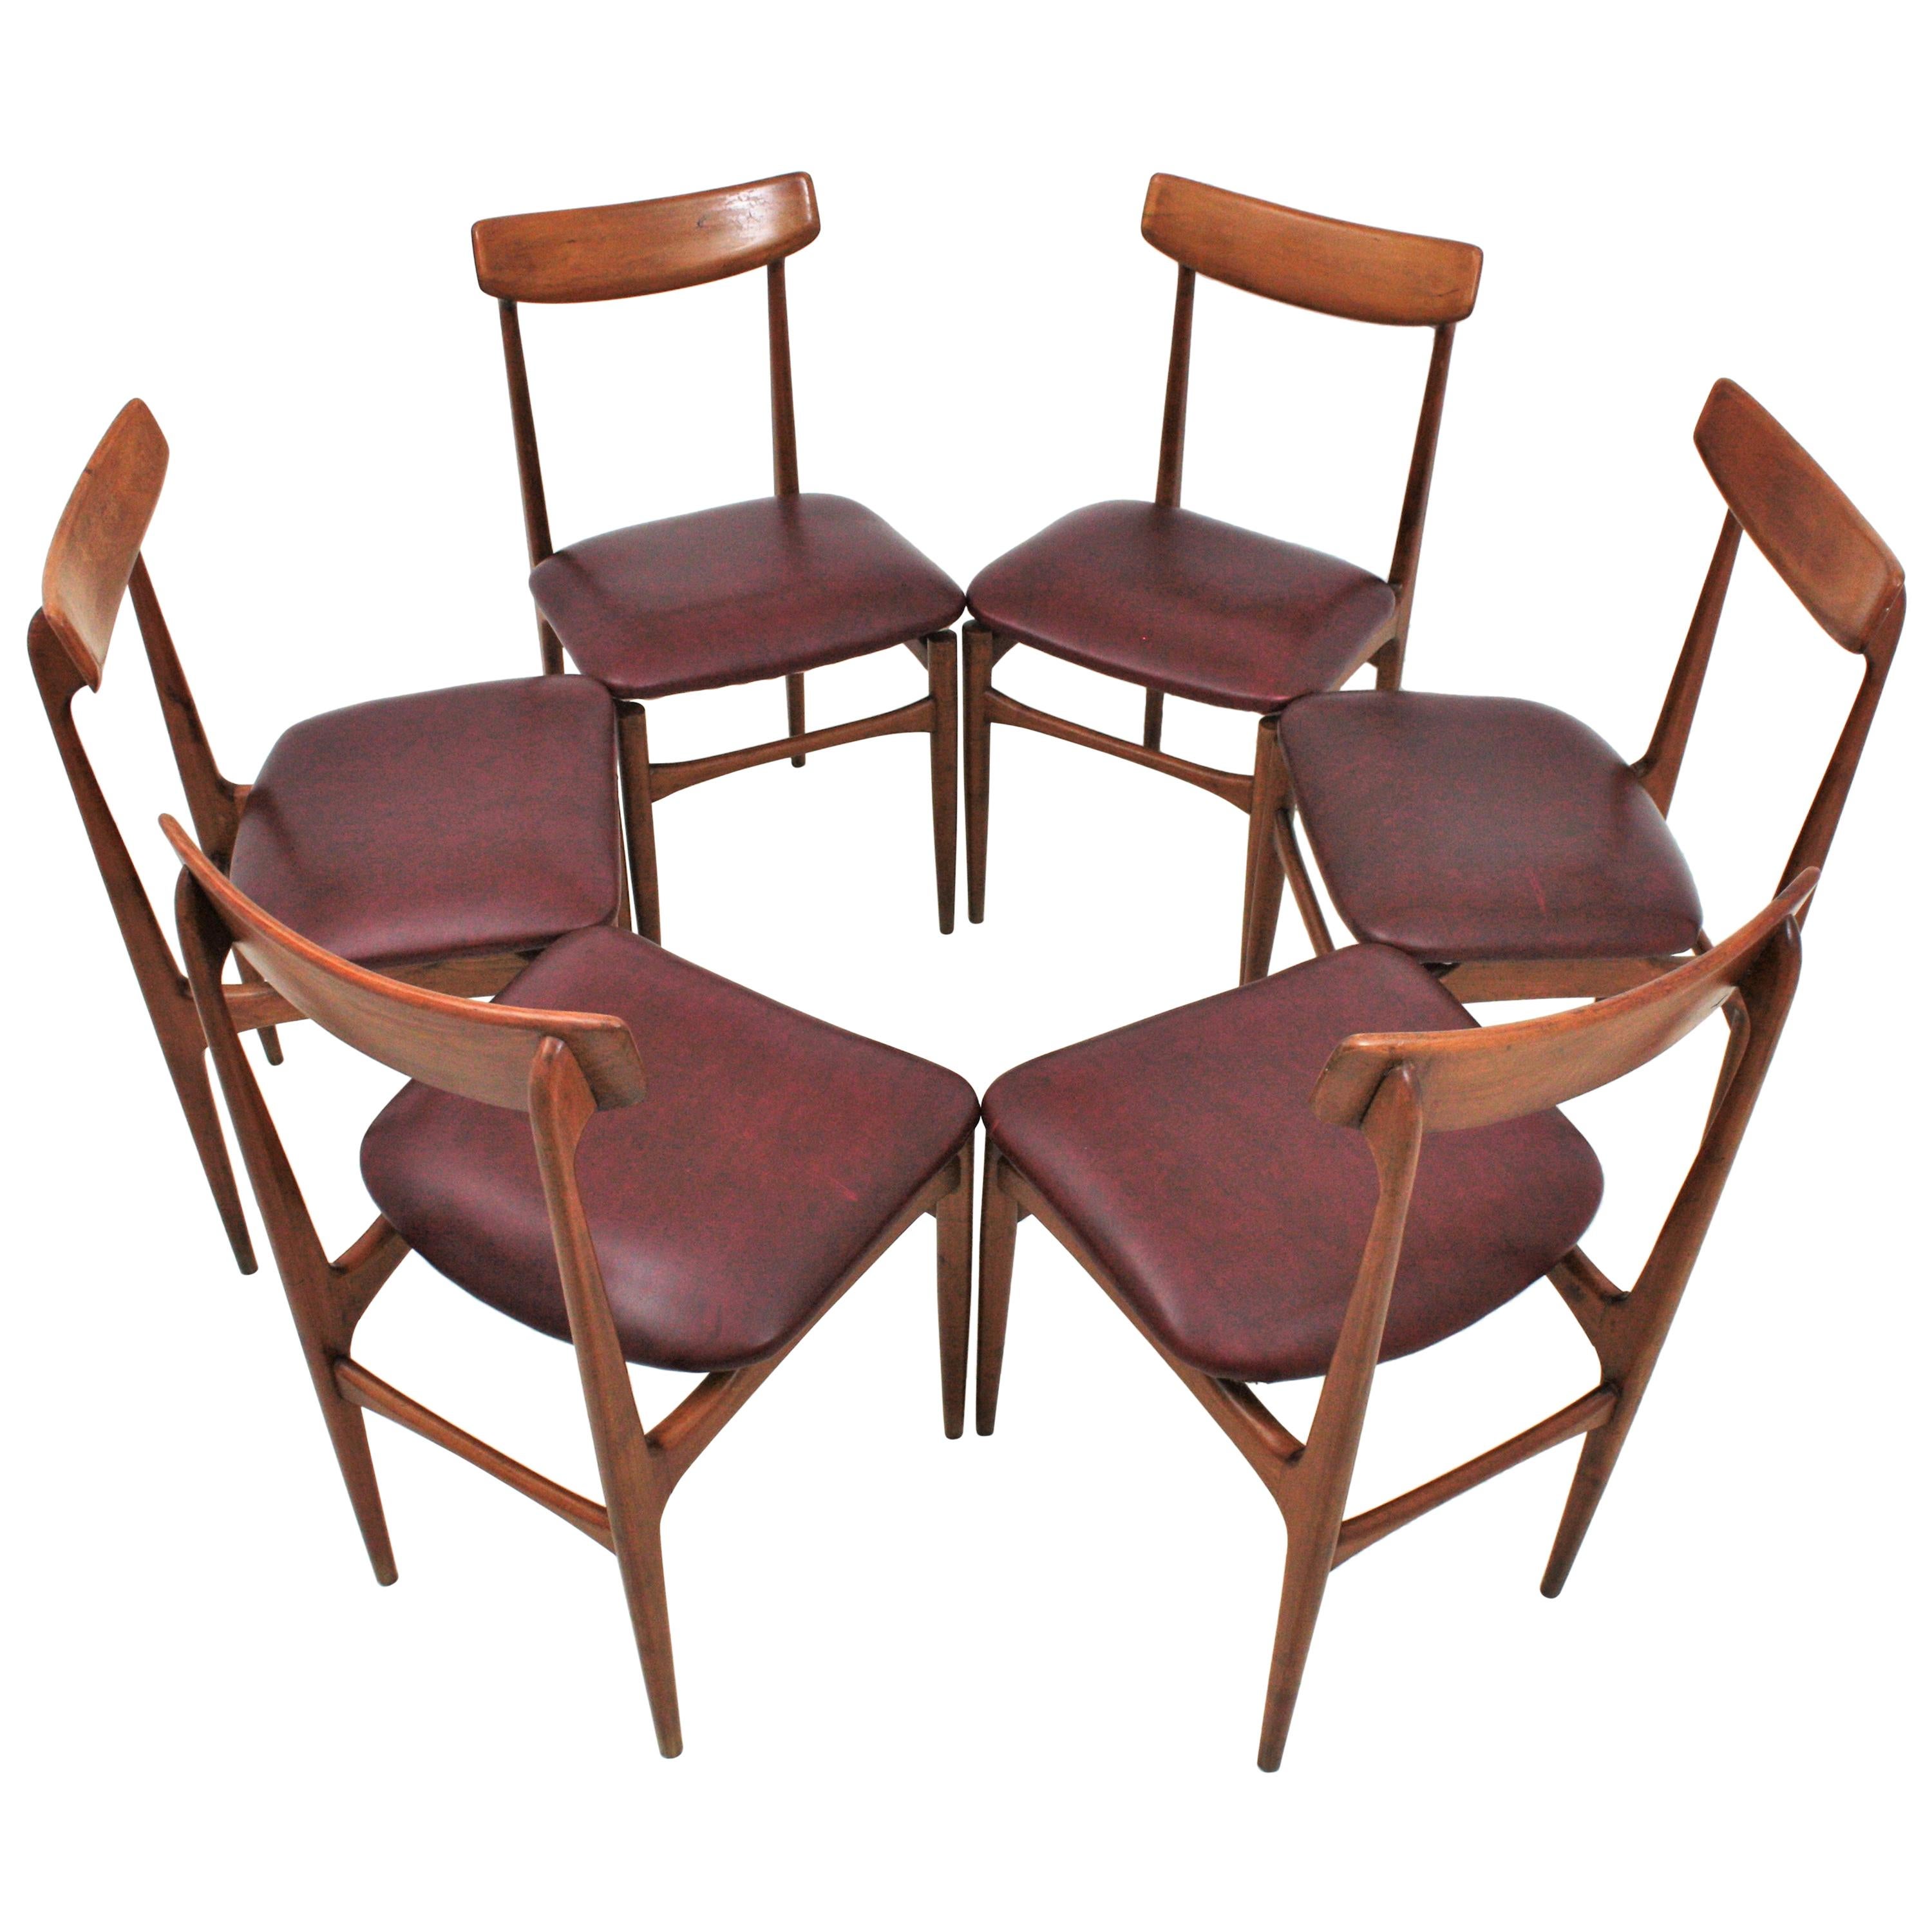 Set of six Helge Sibast style dining chairs in teak and leatherette, Denmark, 1950-1960.
Beautiful model with large teak backrest and teak frame. These elegant dinner chairs have a design with clean lines, cylindrical legs and wooden backrest with